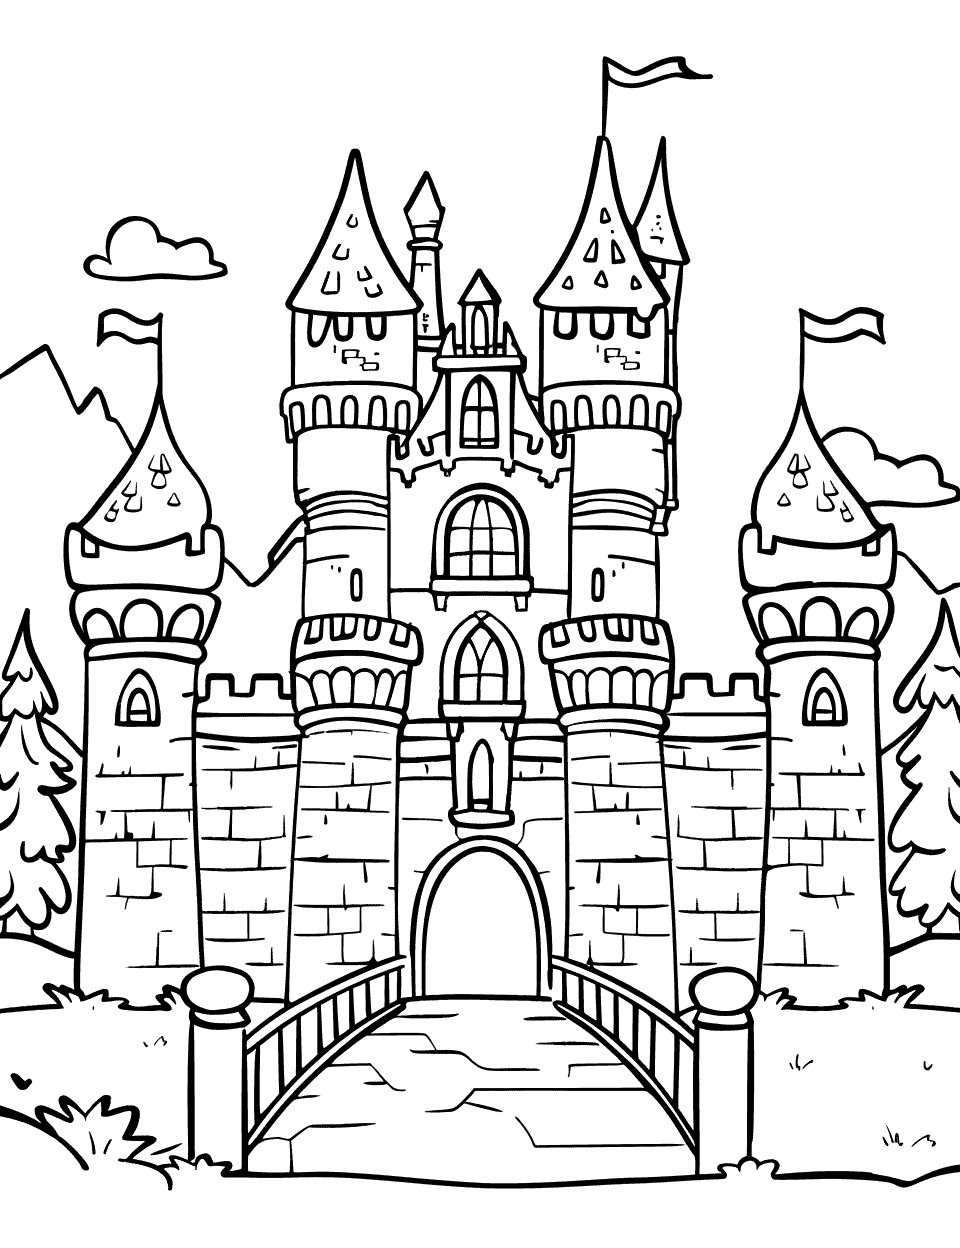 Castle with Drawbridge Down Coloring Page - A welcoming castle with its drawbridge down inviting visitors.